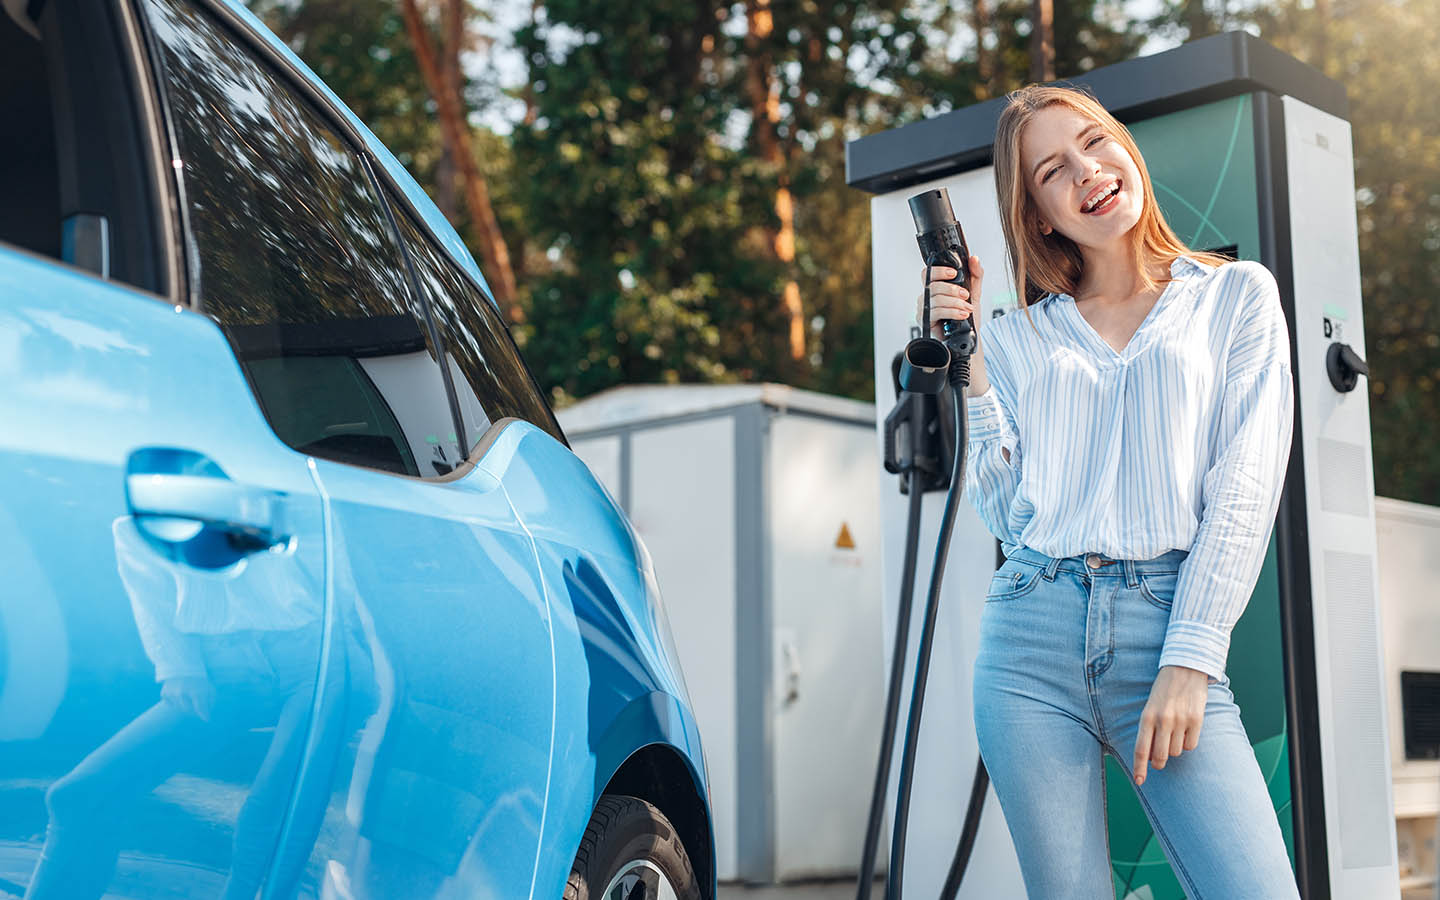 use the ev charging station while shopping, eating or running errands